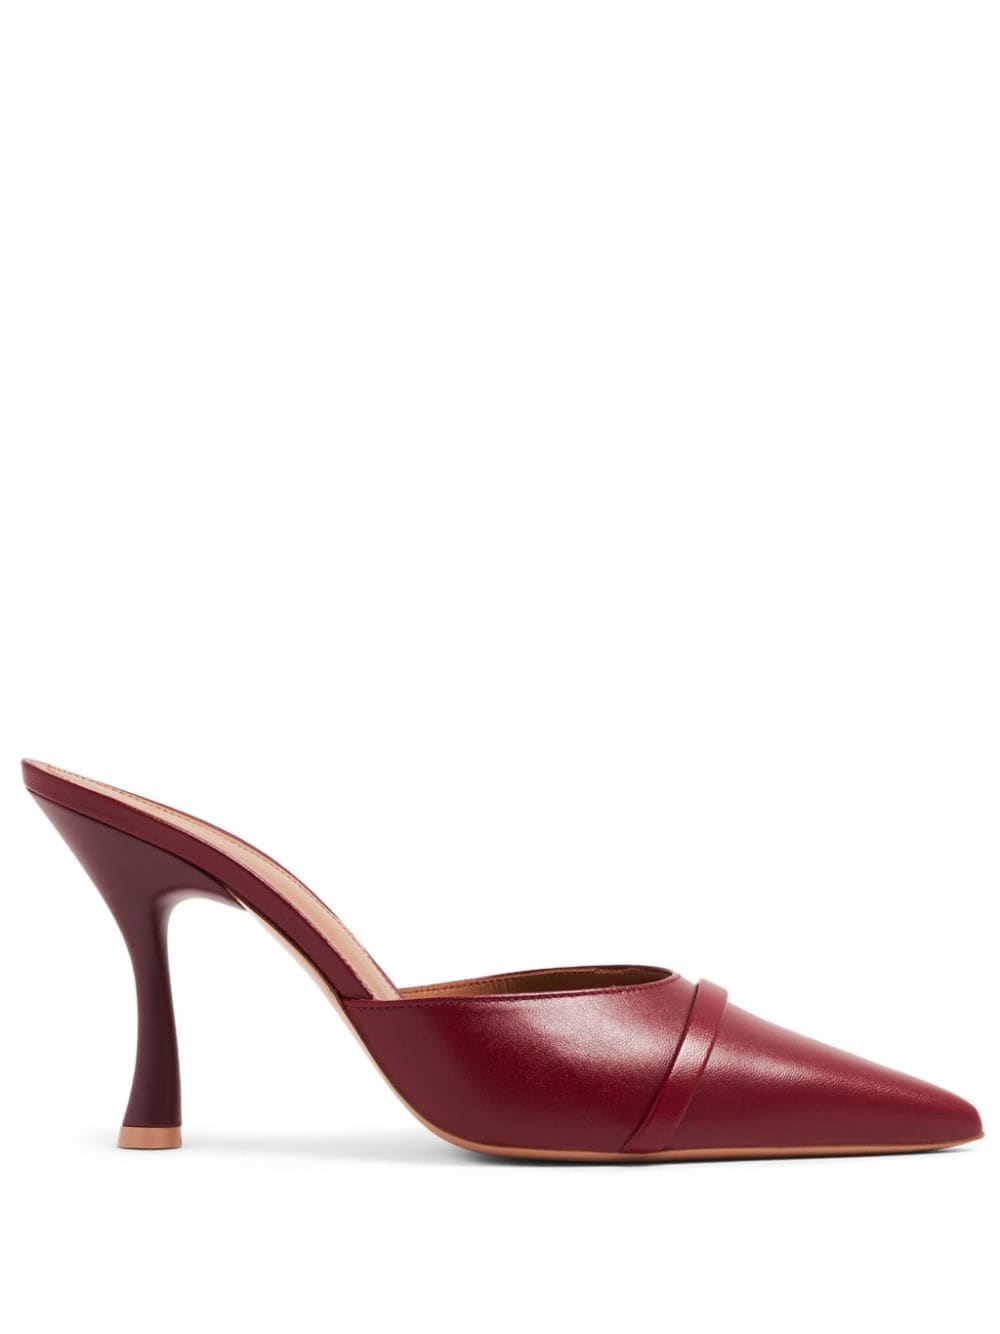 Malone Souliers Joella 90 leather mules - Red von Malone Souliers